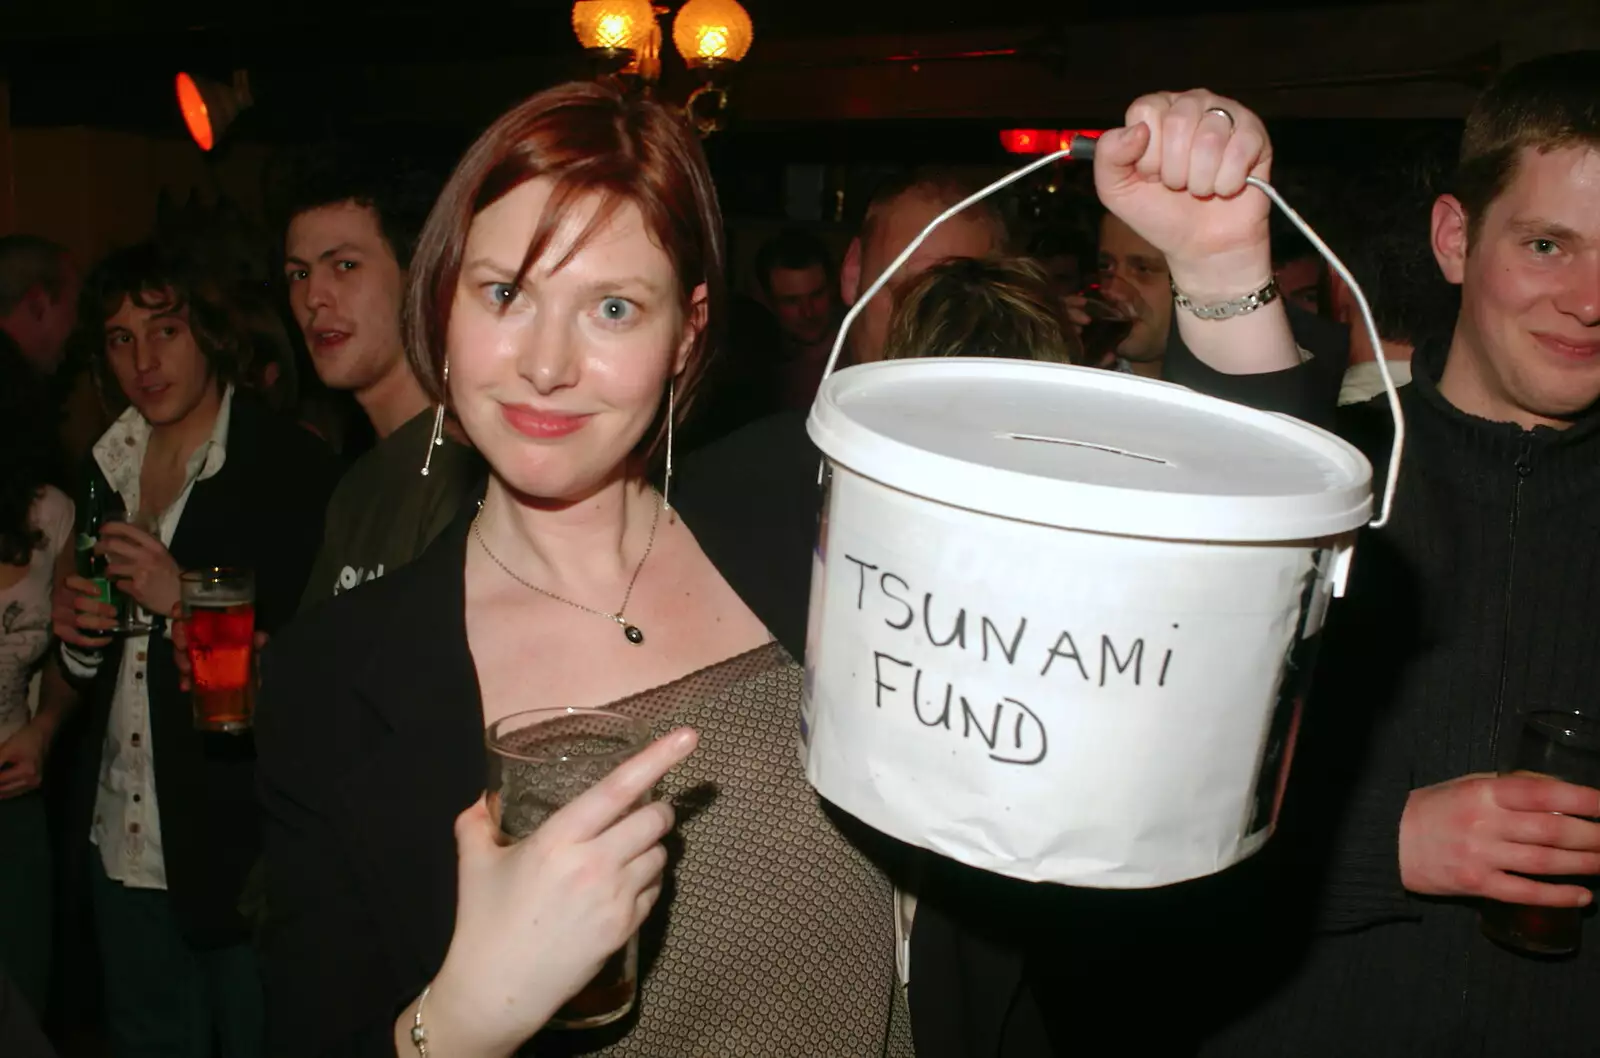 Proof that it's for the Tsunami fund, from Tsunami-Aid at the Greyhound, Botesdale, Suffolk - 5th February 2005